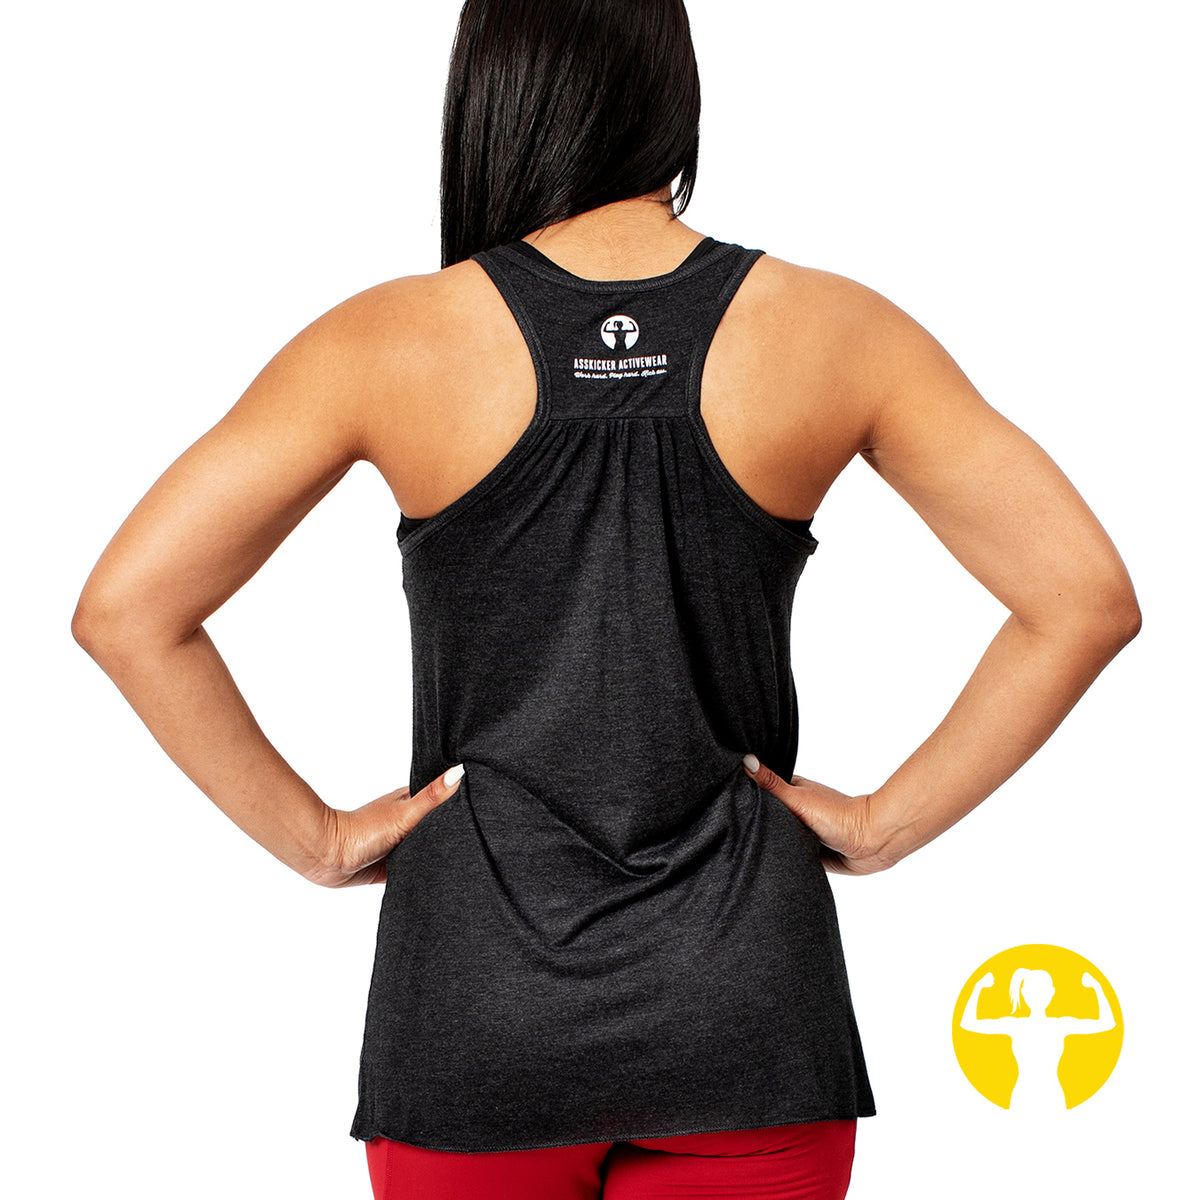 The North Face Women's Large/L Slim Fit Racerback Athletic Workout